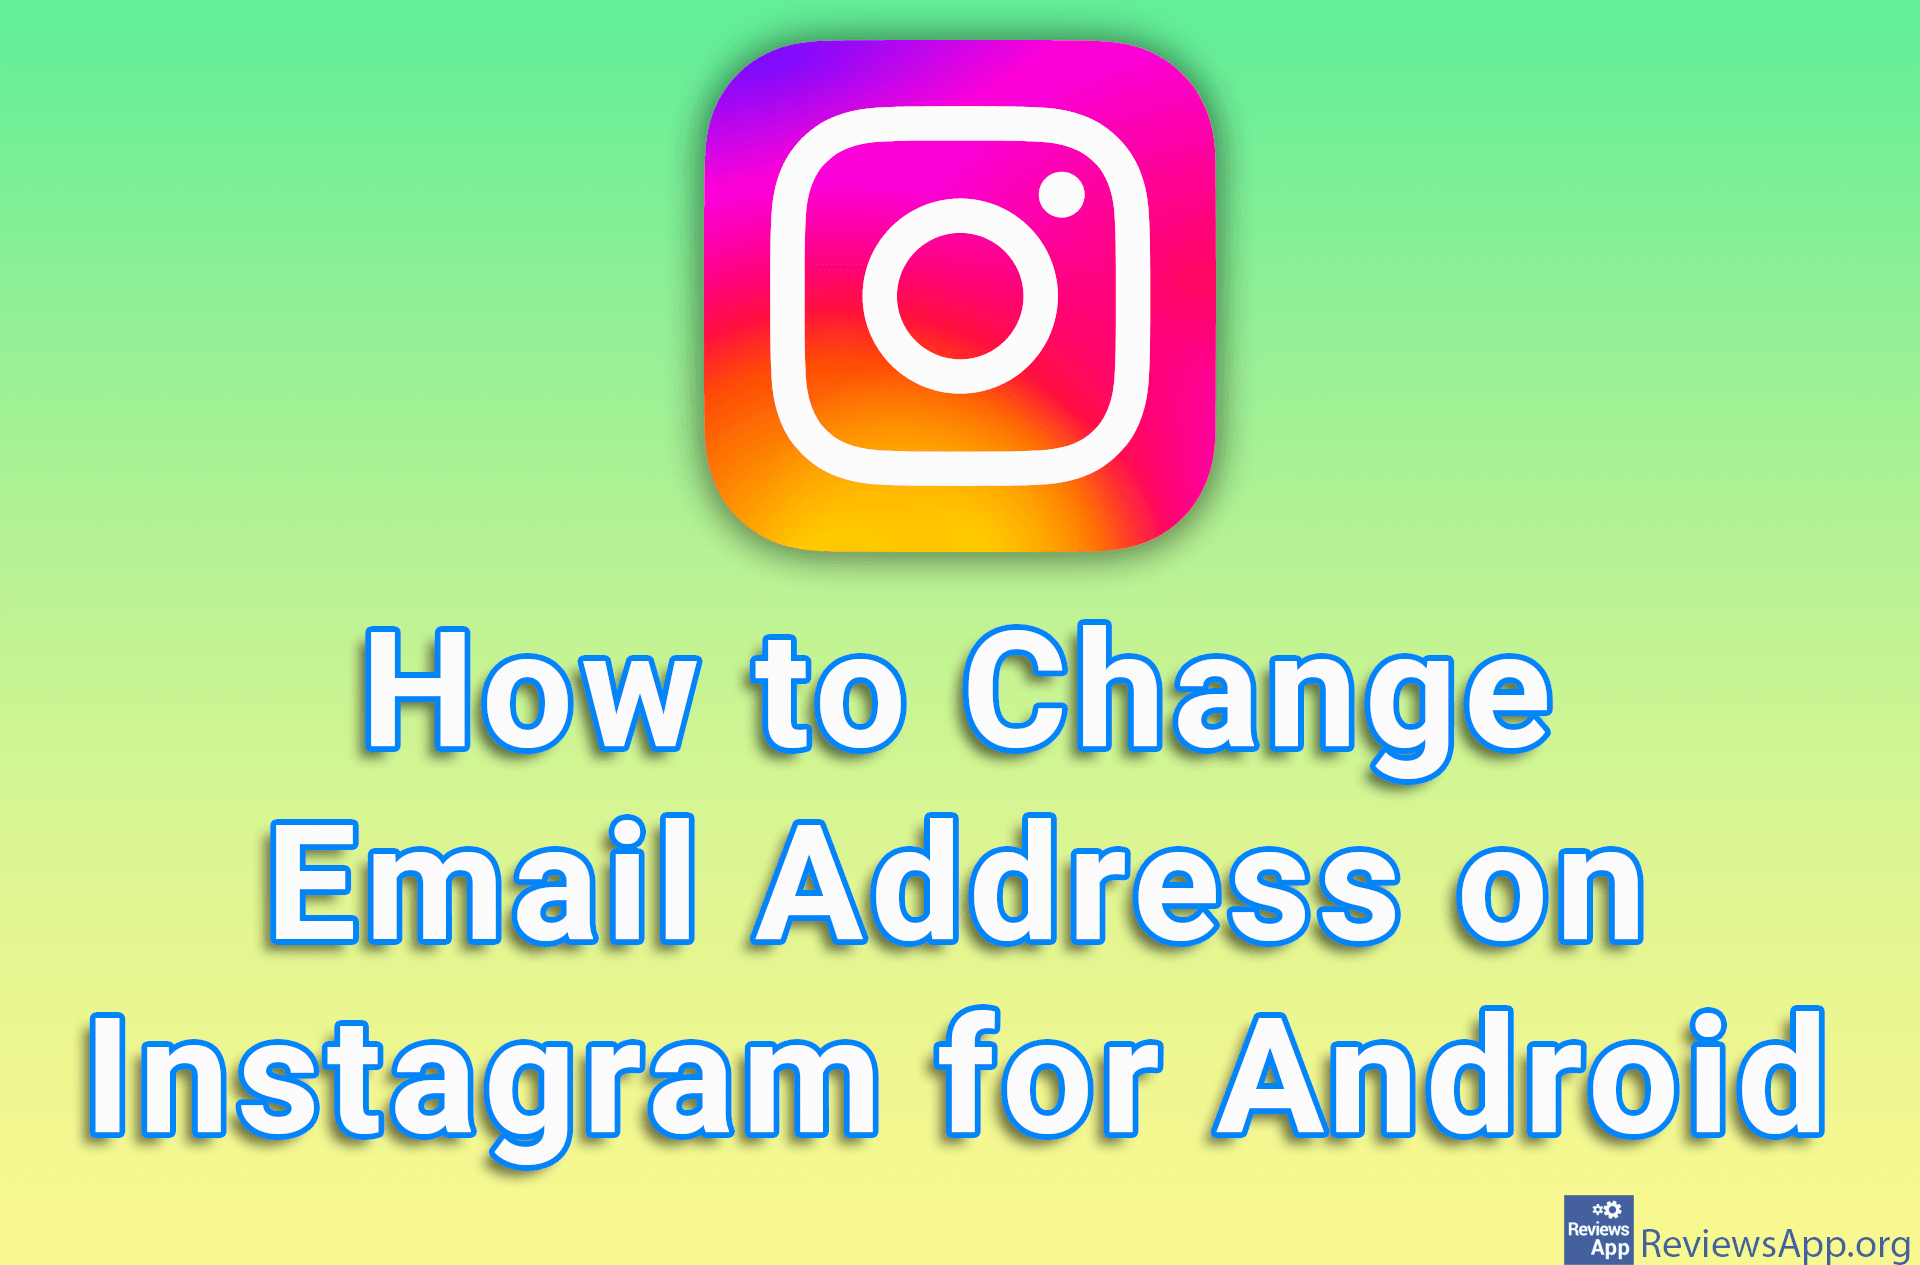 How to Change Email Address on Instagram for Android